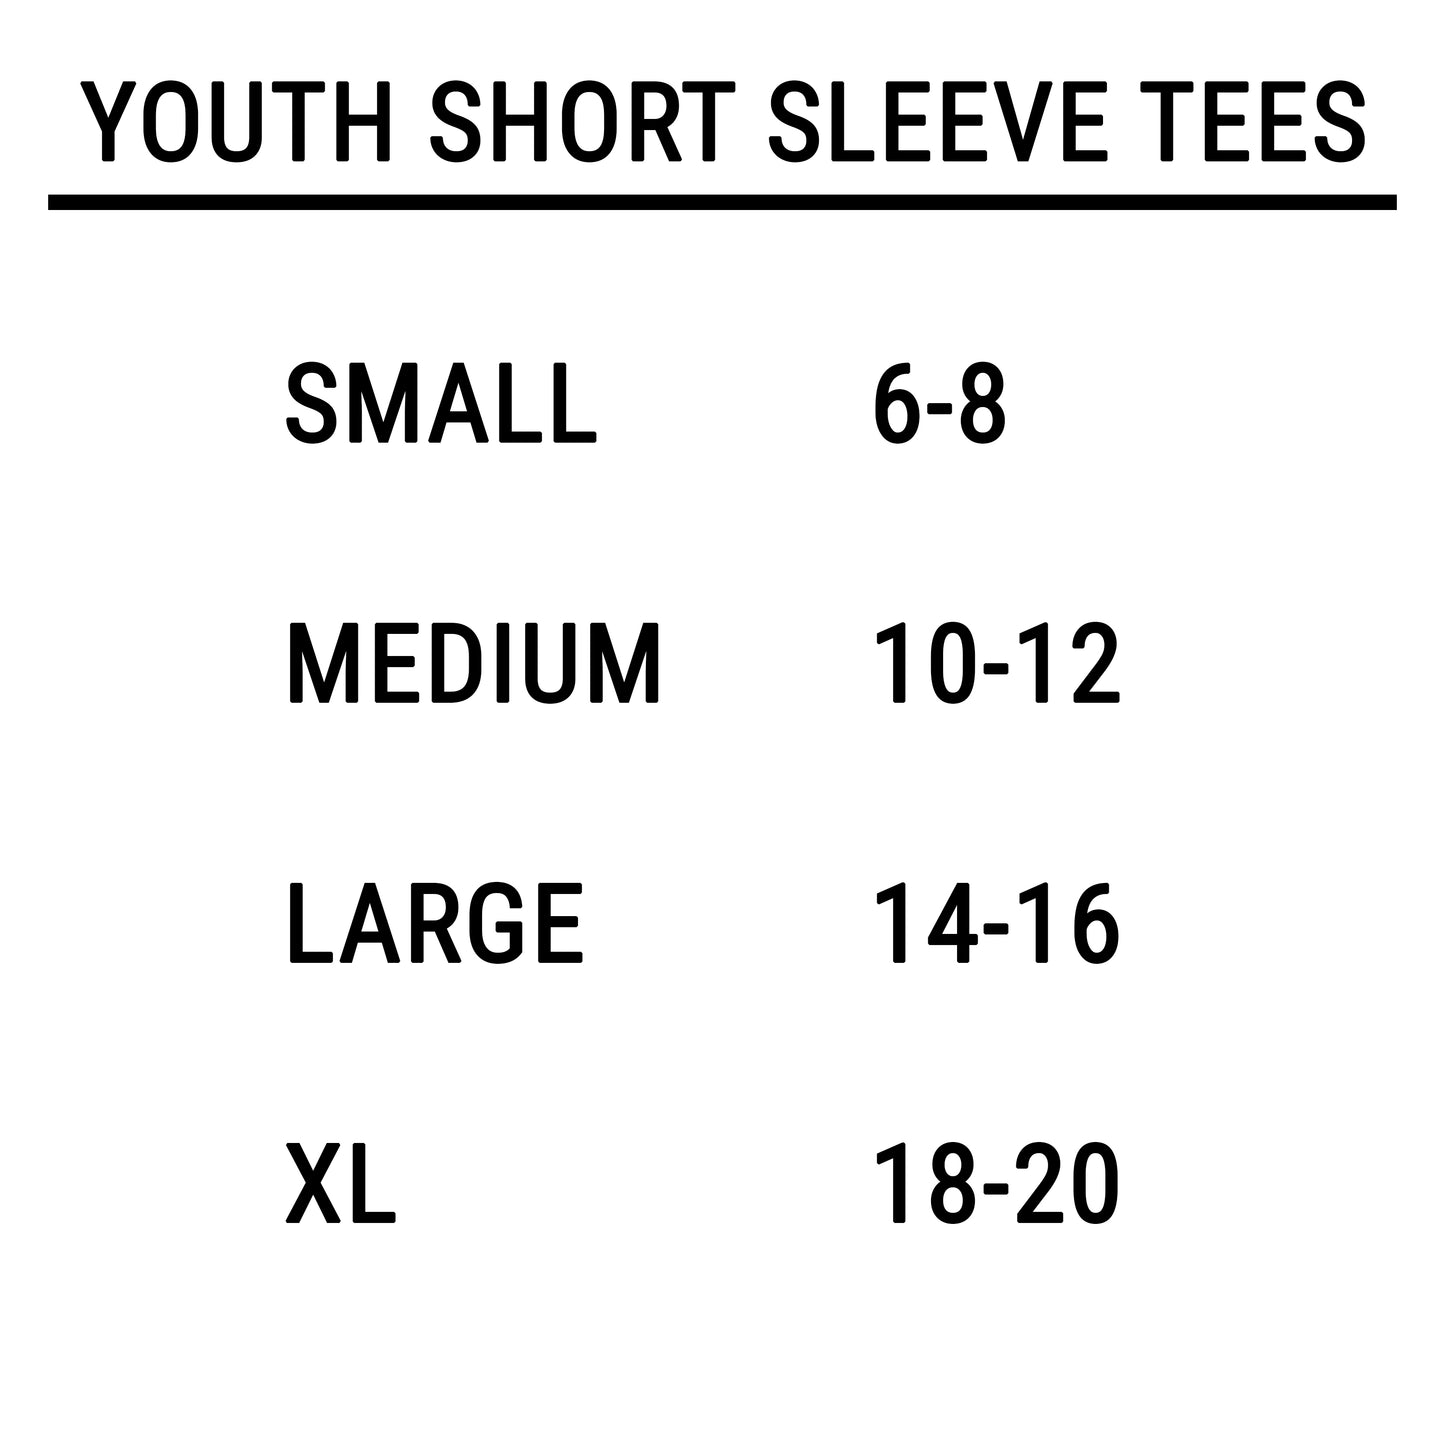 Created With A Purpose Colorful Youth Short Sleeve Crew